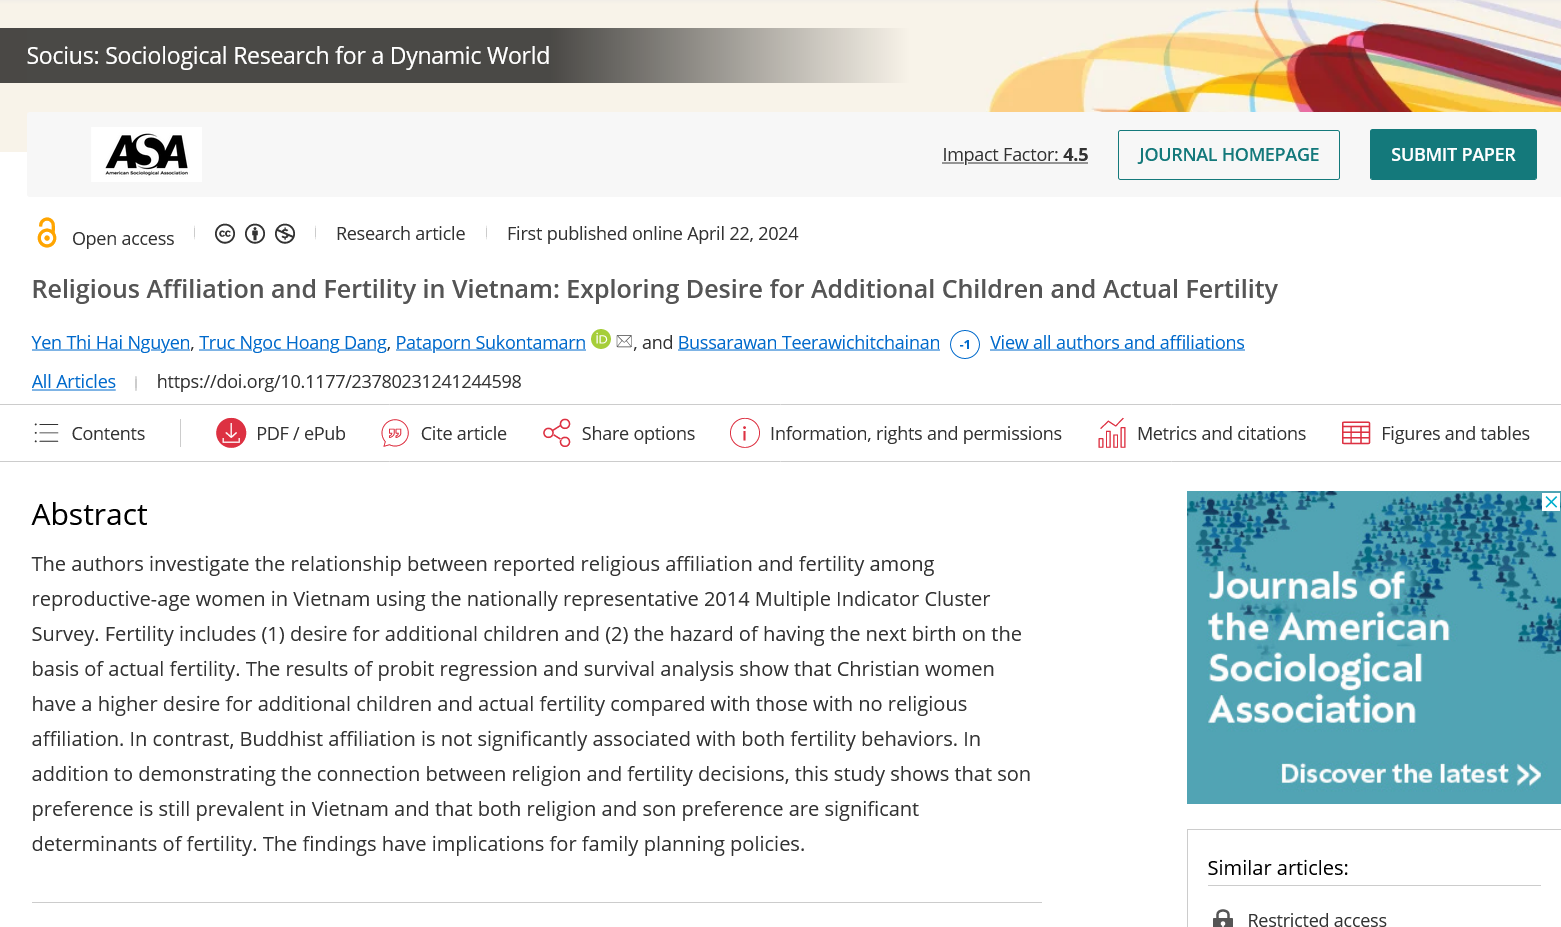 Religious Affiliation and Fertility in Vietnam: Exploring Desire for Additional Children and Actual Fertility